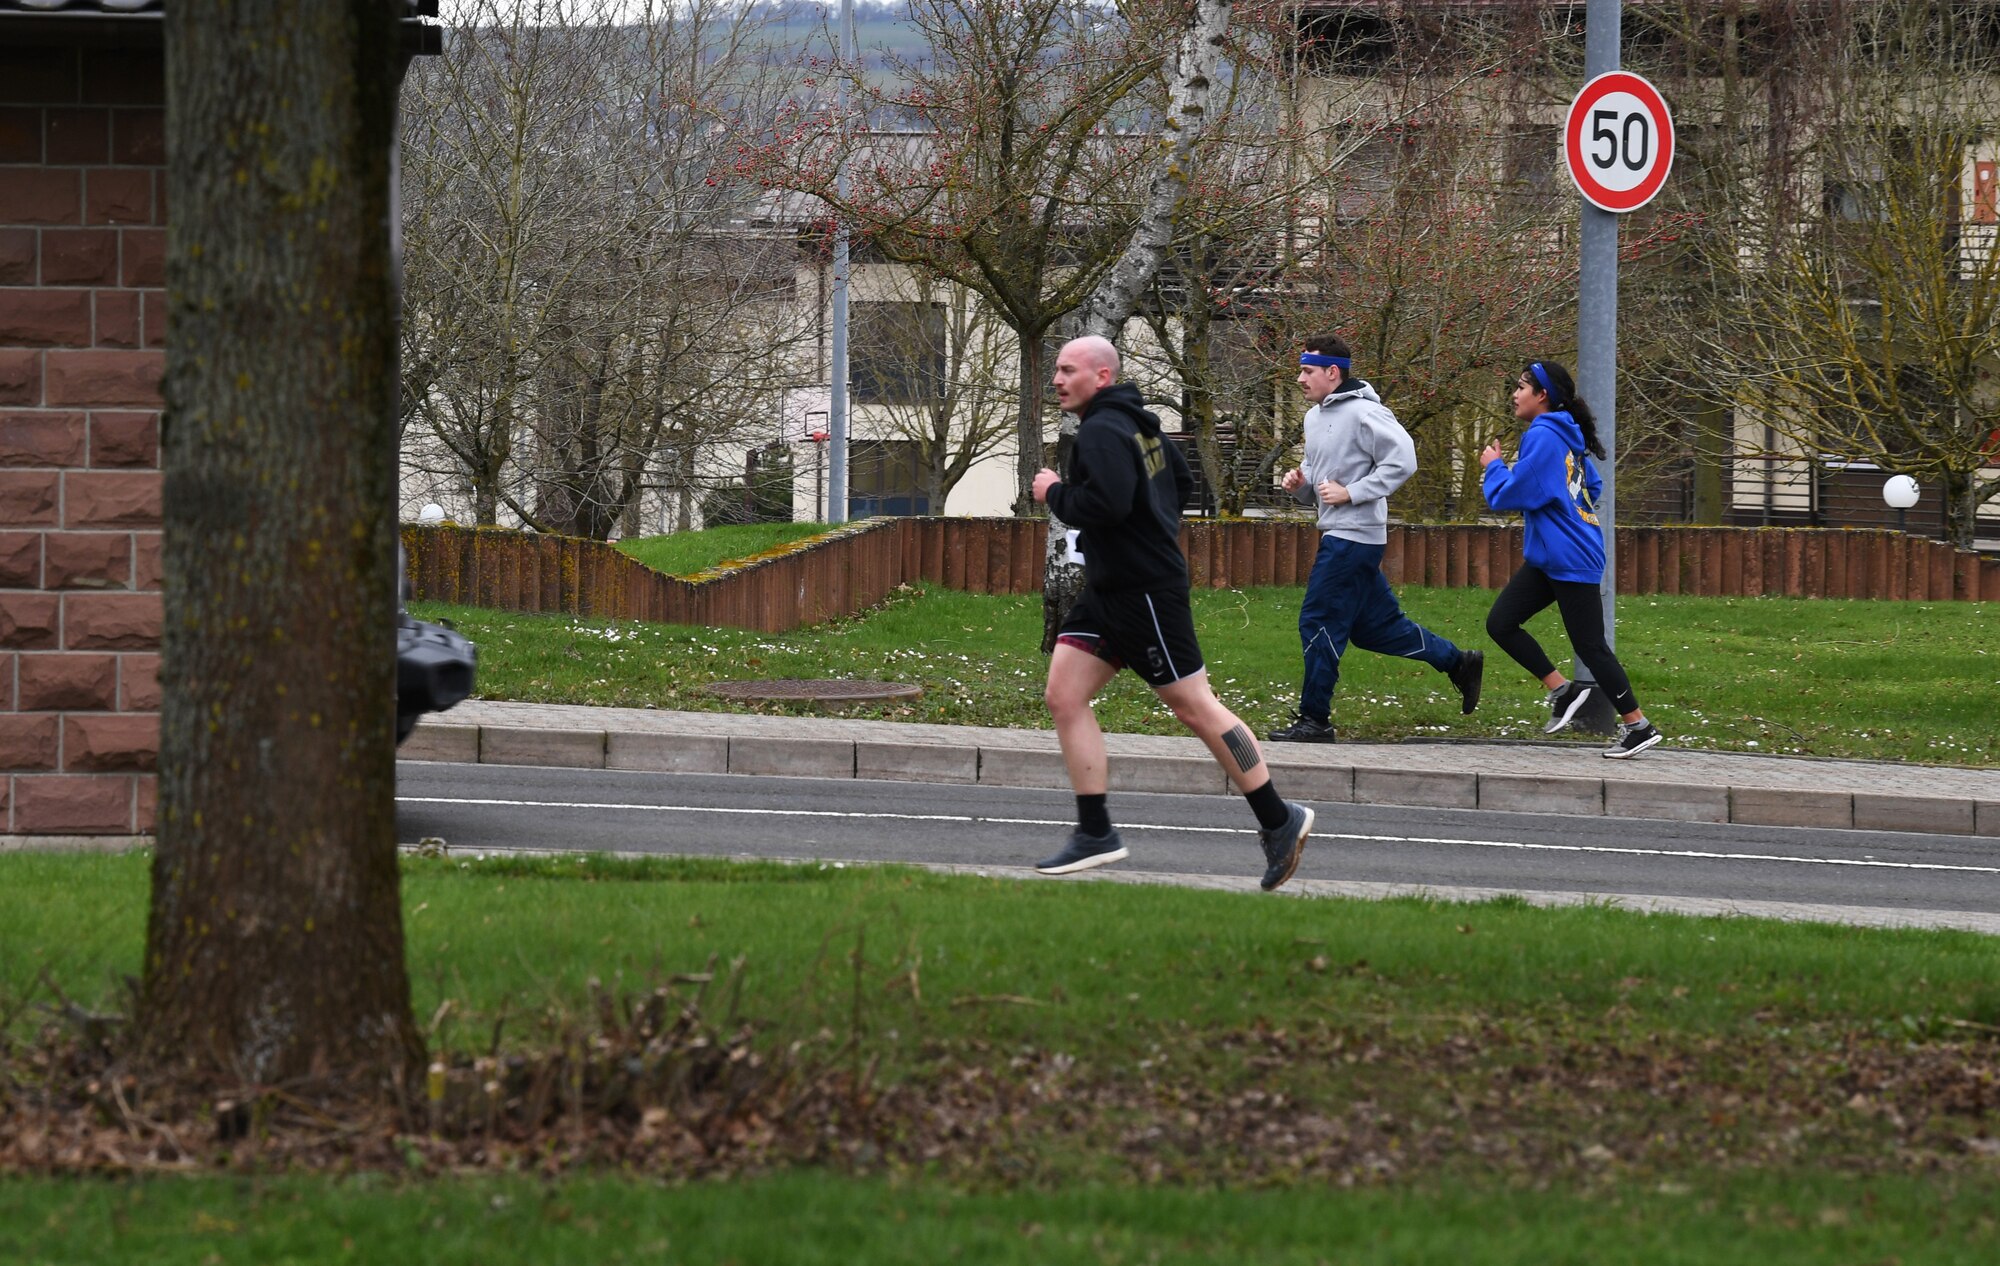 Participants of the "Run with Rosie" race run to the next location at Spangdahlem Air Base, Germany, March 12, 2020. The race consisted of clues and trivia that led participants to different locations around the base. (U.S. Air Force photo by Airman 1st Class Alison Stewart)